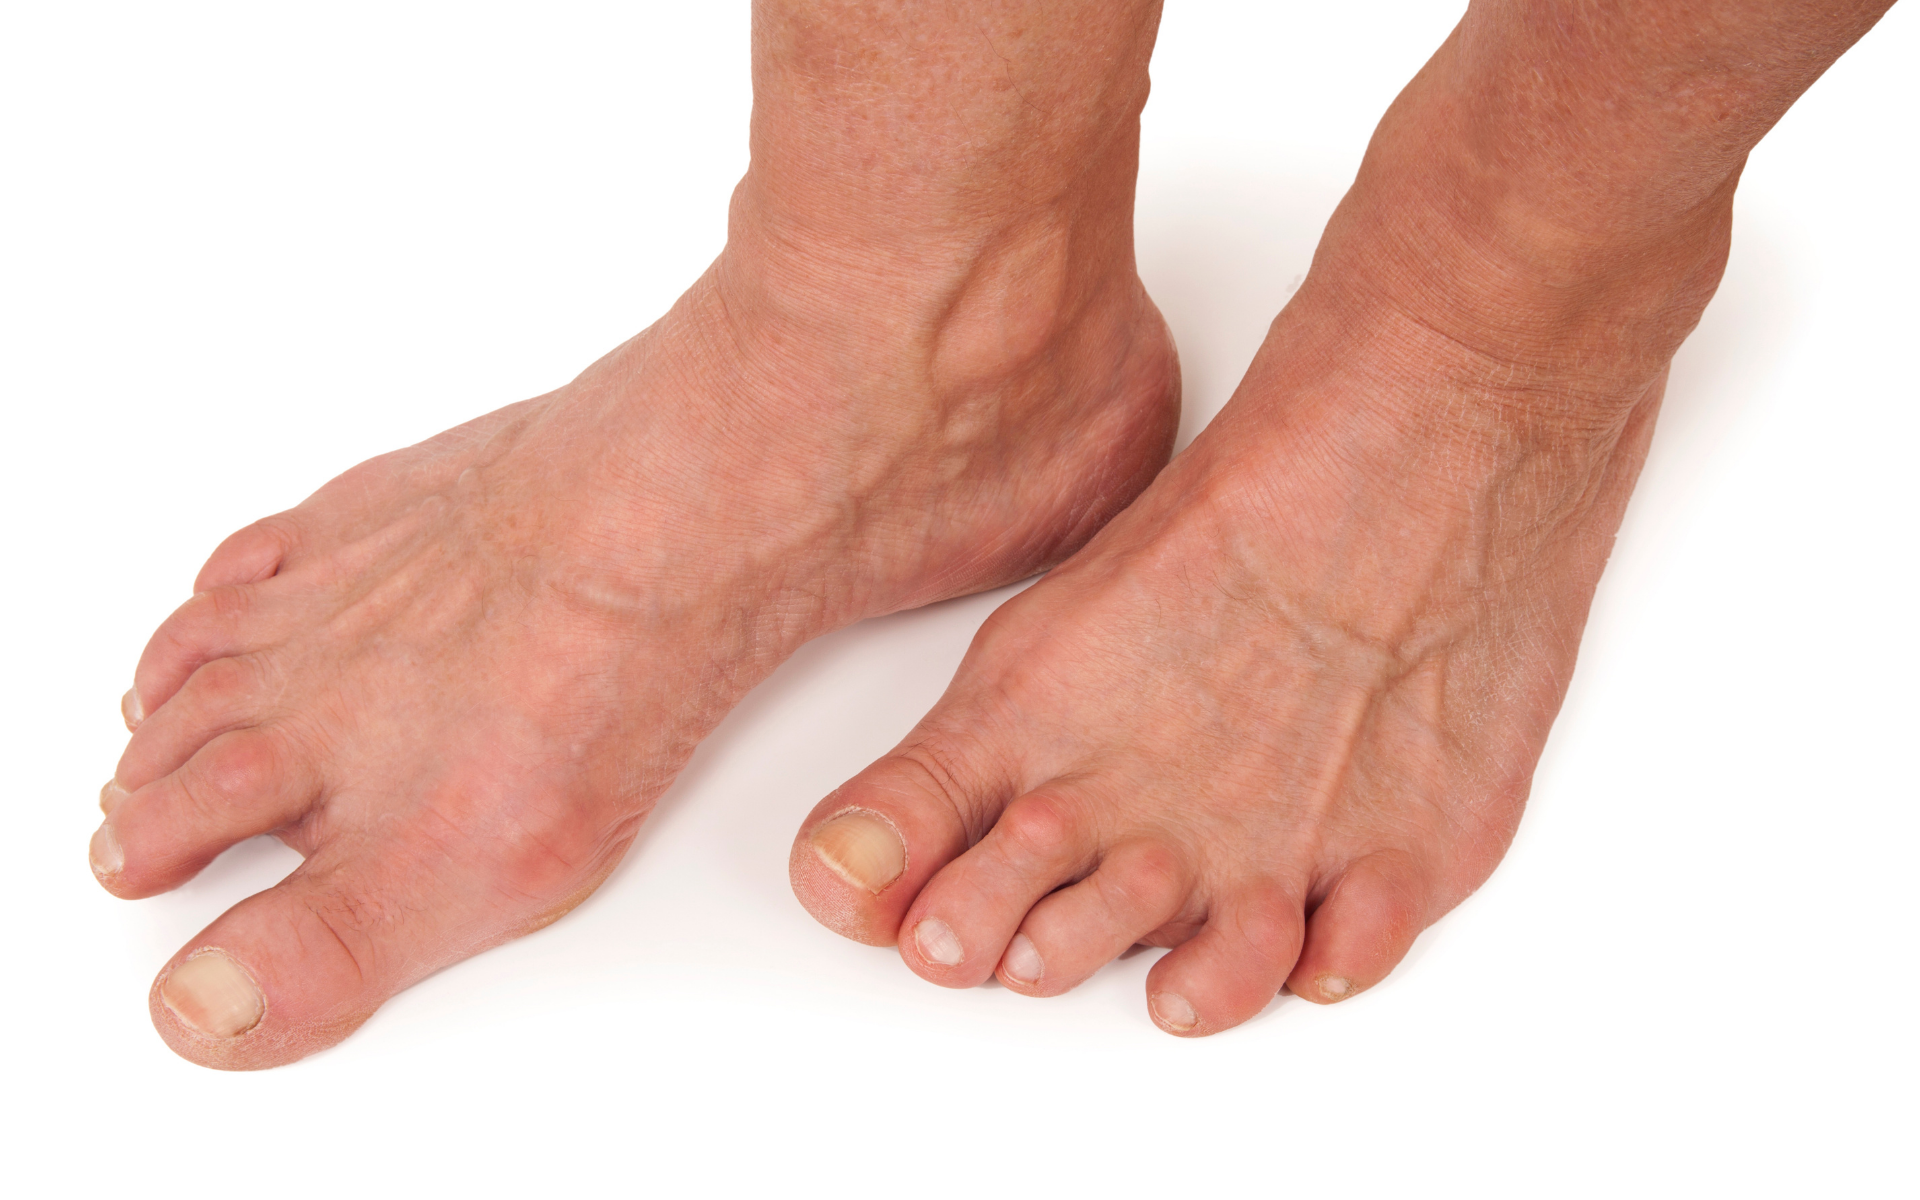 diabetic and arthritis foot care by steady gait foot clinic in Scarborough Ontario